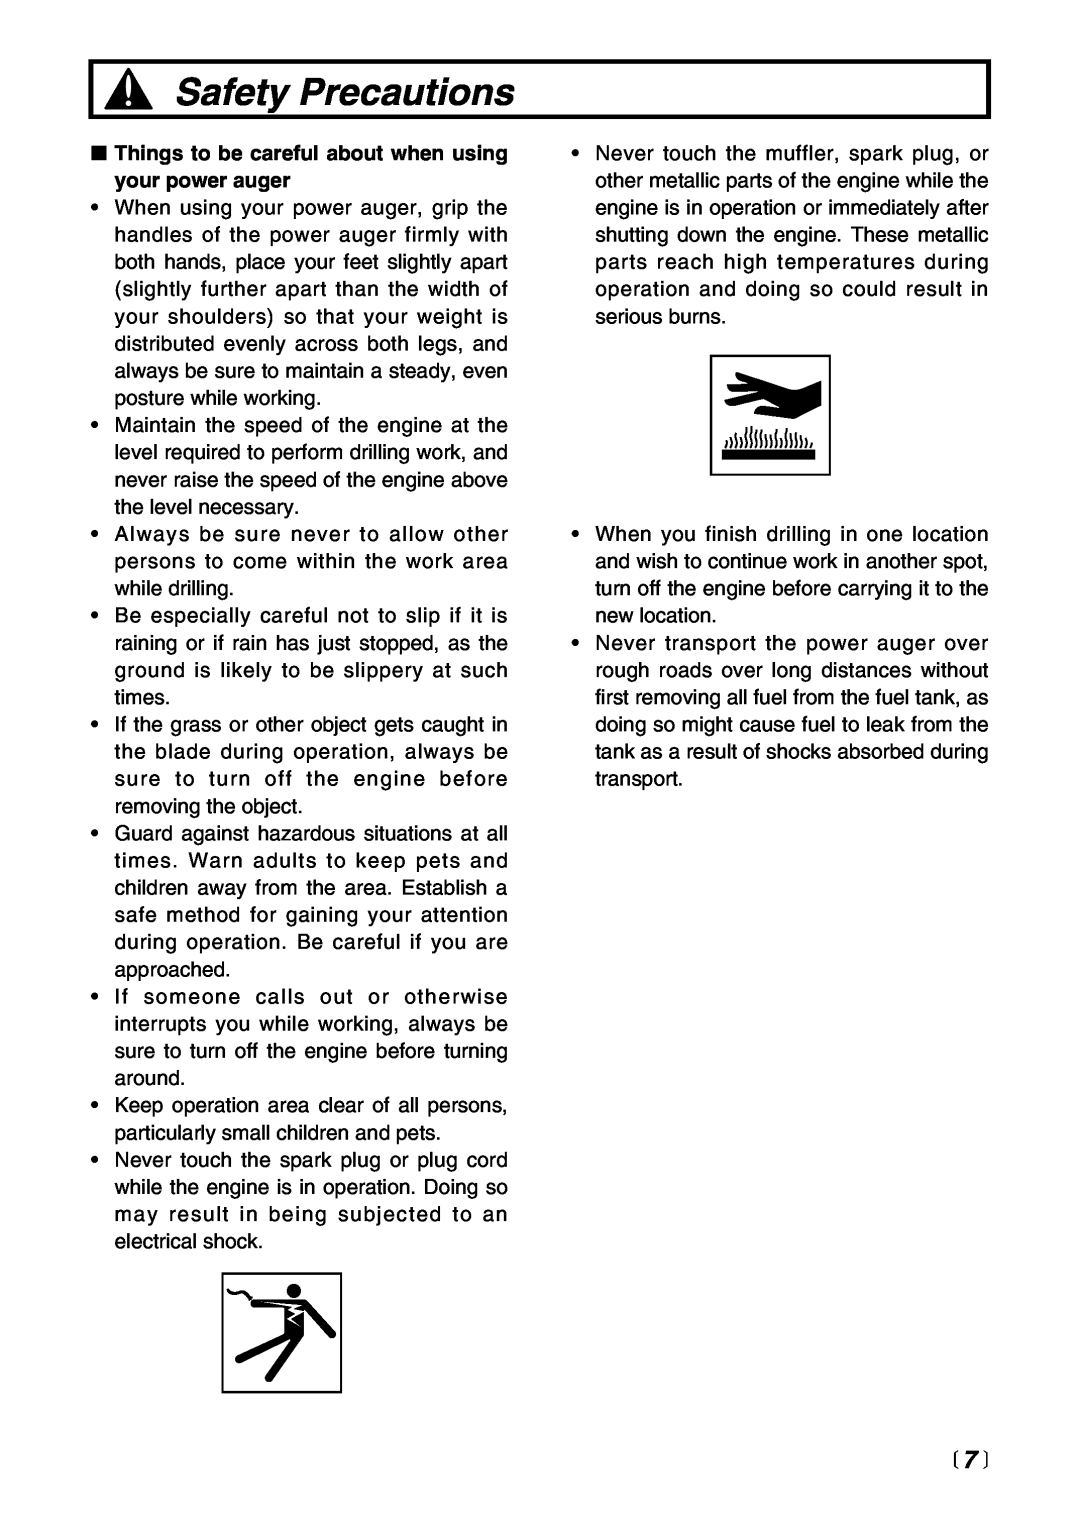 RedMax AG2300 manual  7 , Safety Precautions, Things to be careful about when using your power auger 